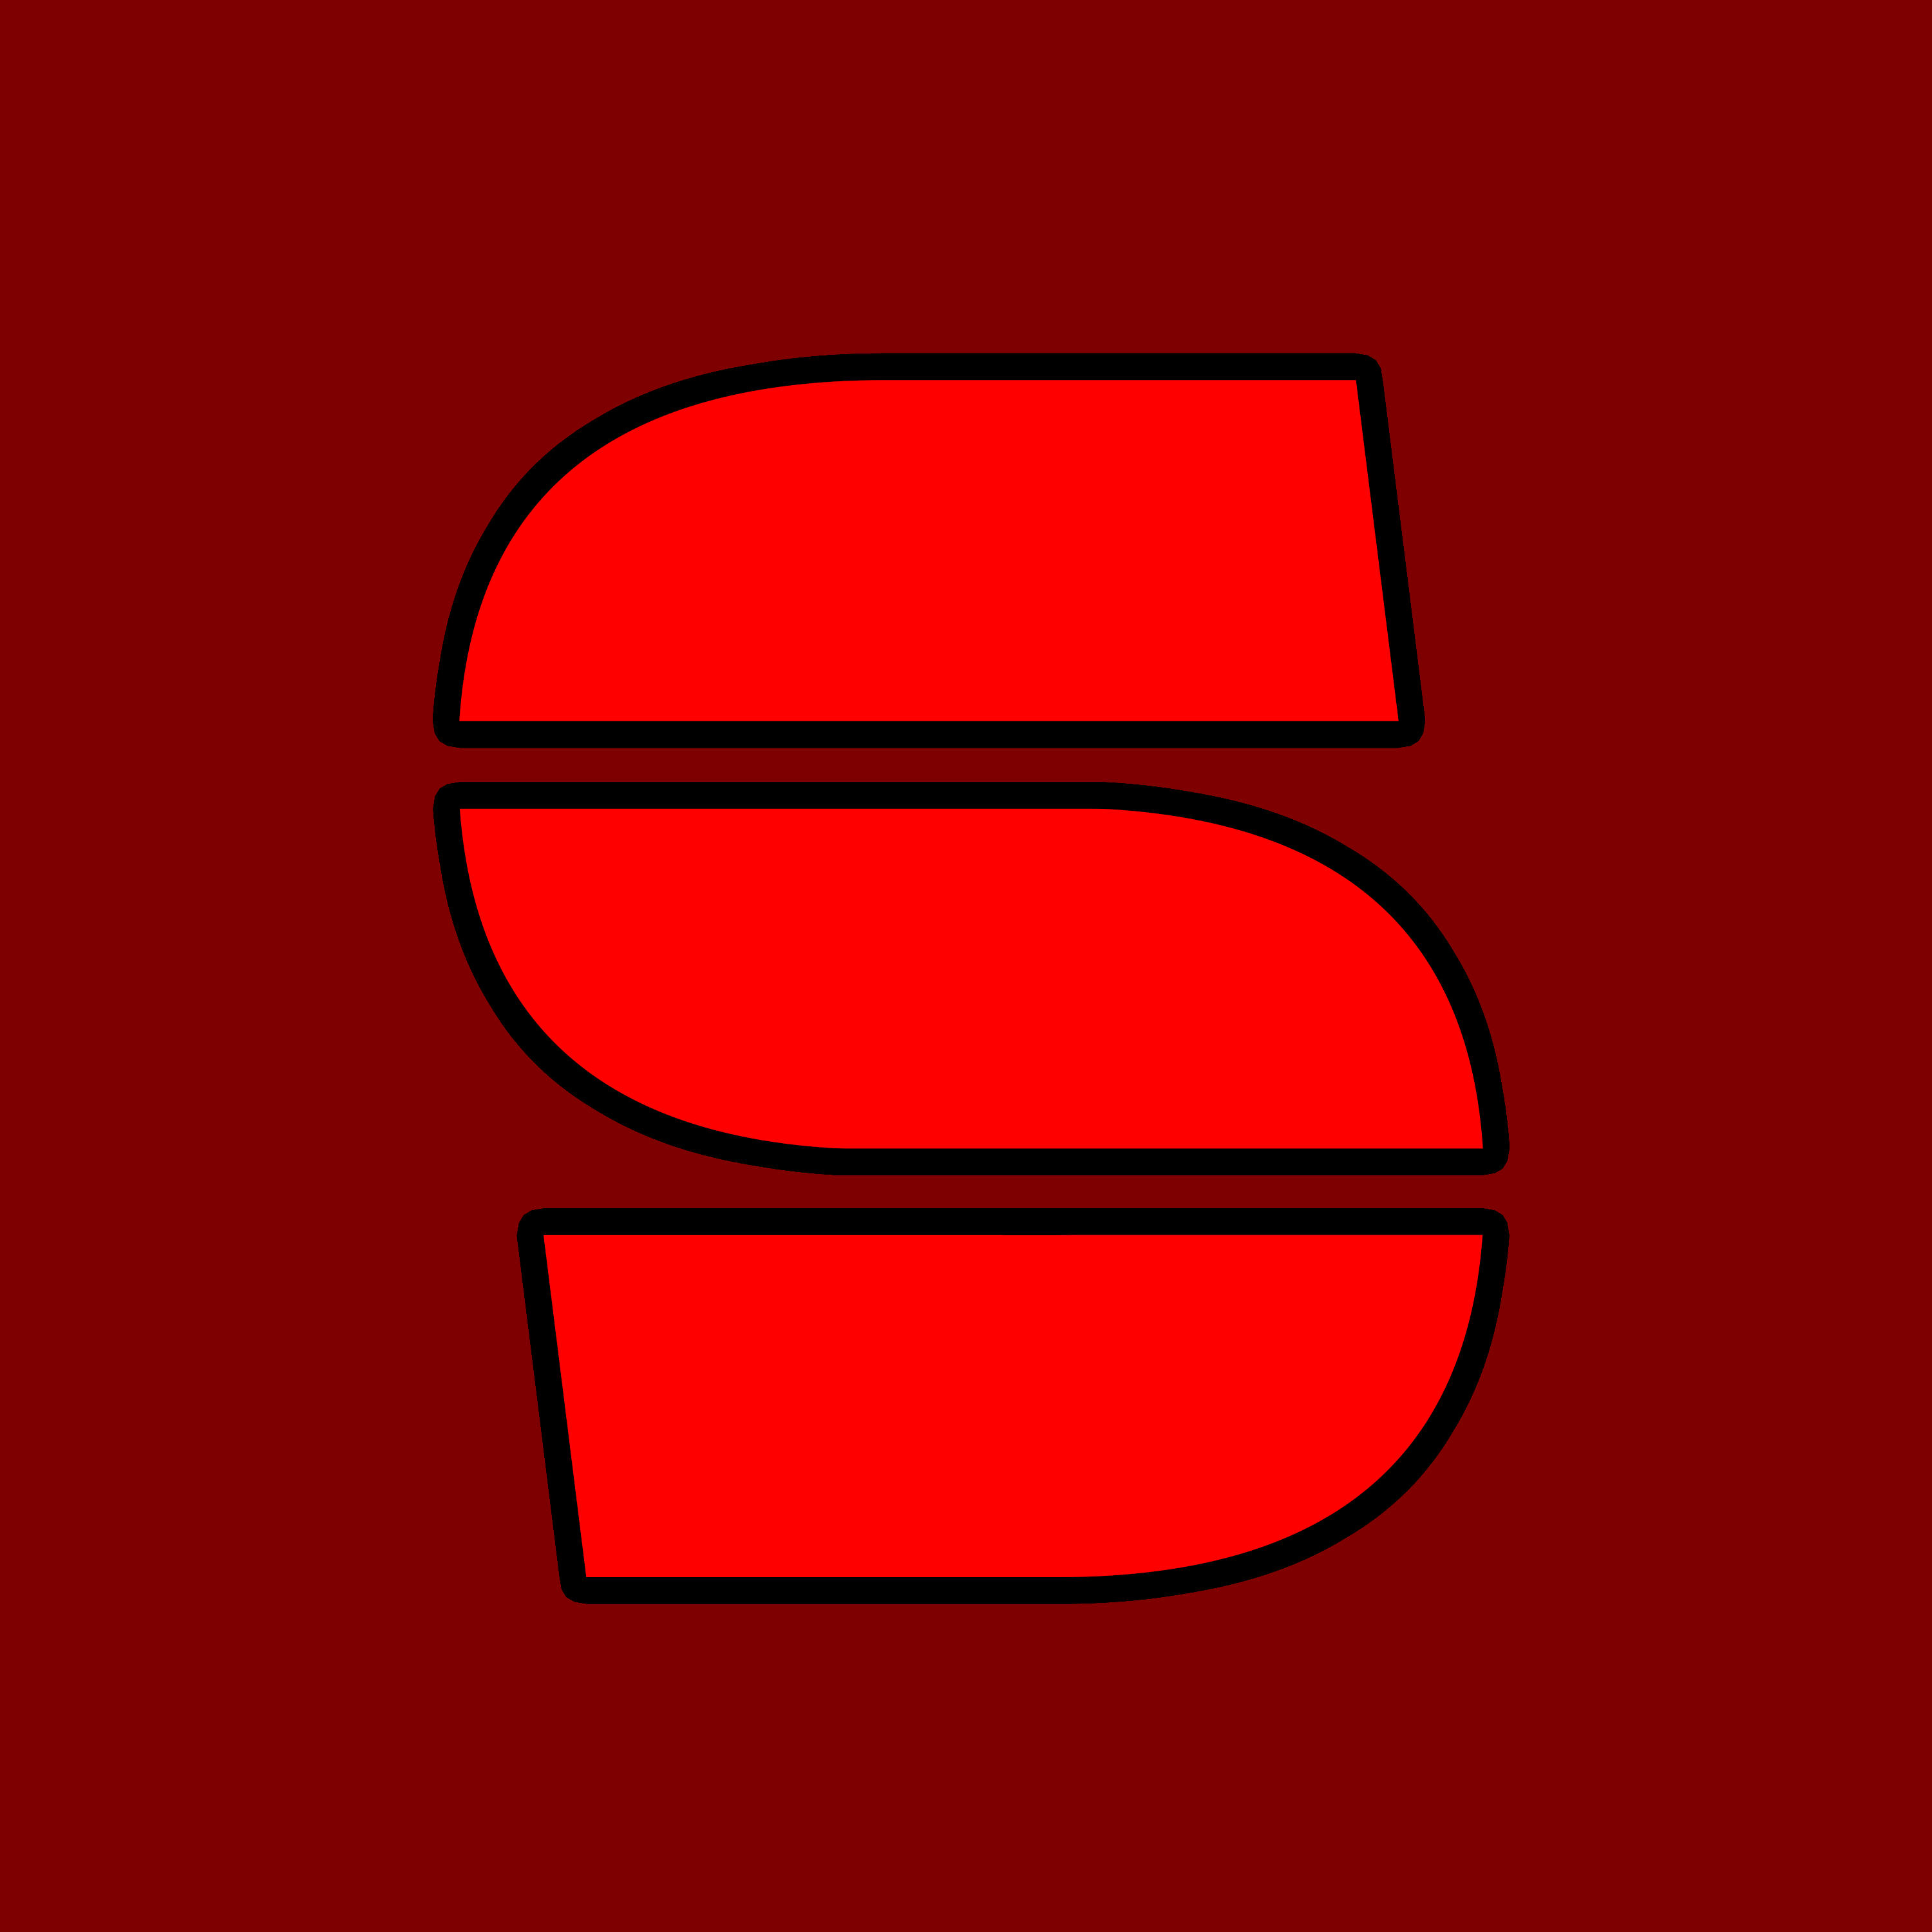 SirSpiro's logo. A red 'S' with each layer seperated with a stroke.